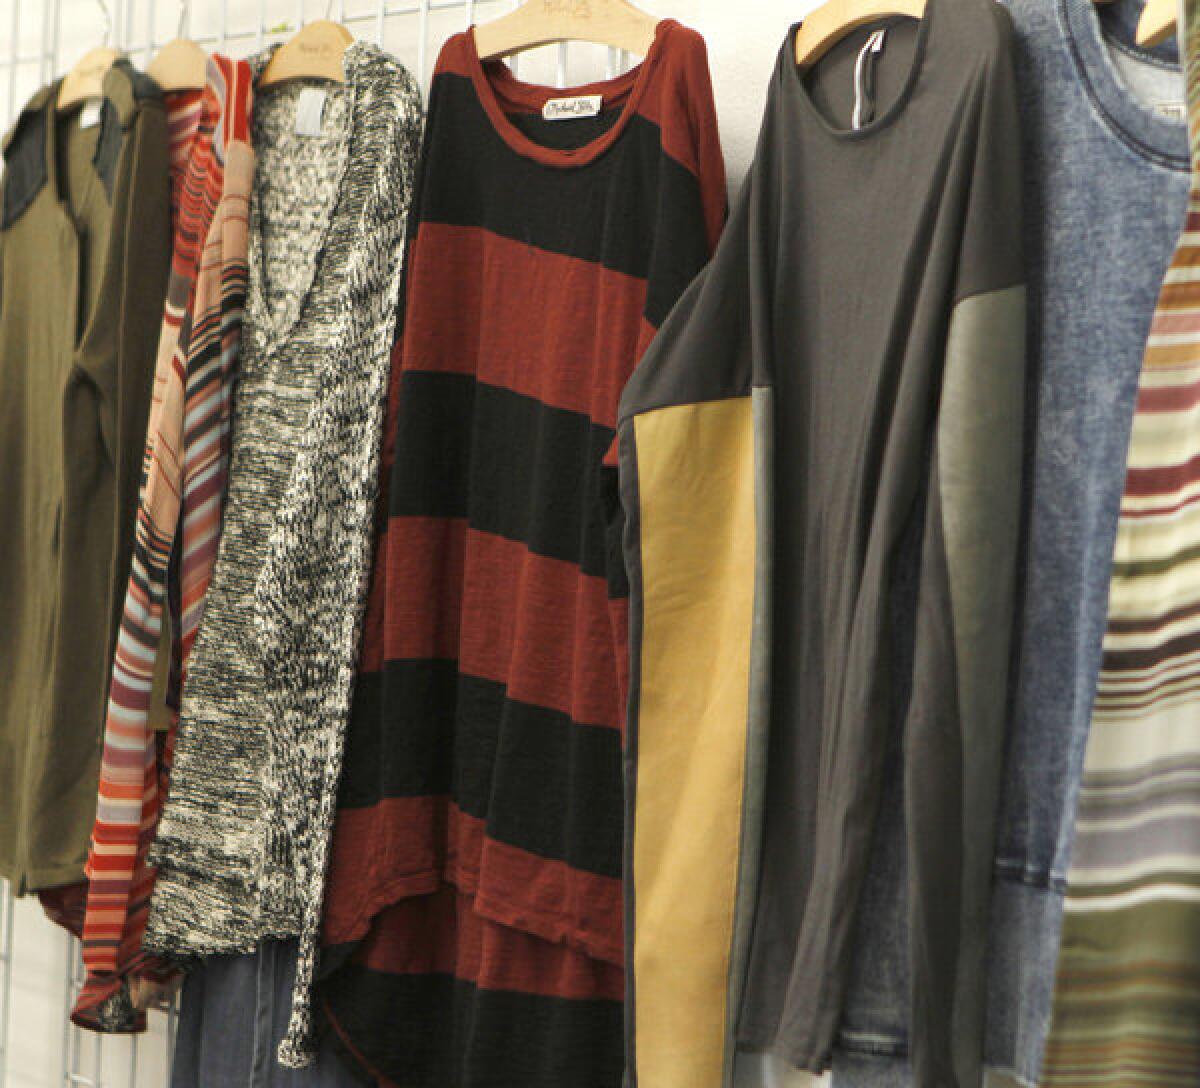 A selection of tops from Michael Stars' 2013 fall line, which is set to launch in July at the Michael Stars store that's scheduled to open June 29 at the Malibu Country Mart.